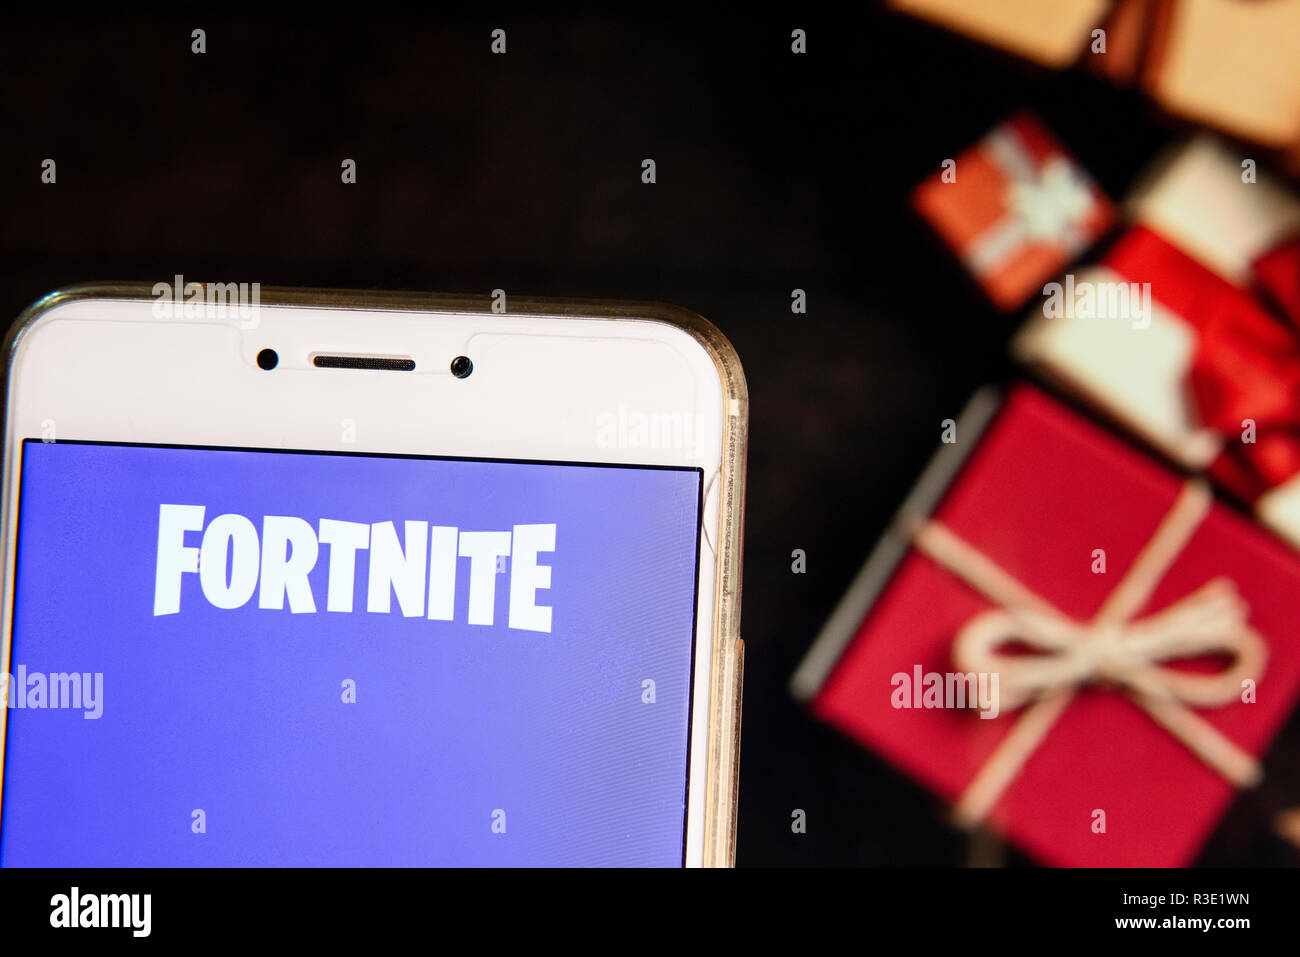 Online Video Game By Epic Games Company Fortnite Logo Is Seen On An Android Mobile Device With A Christmas Wrapped Gifts In The Background Stock Photo Alamy